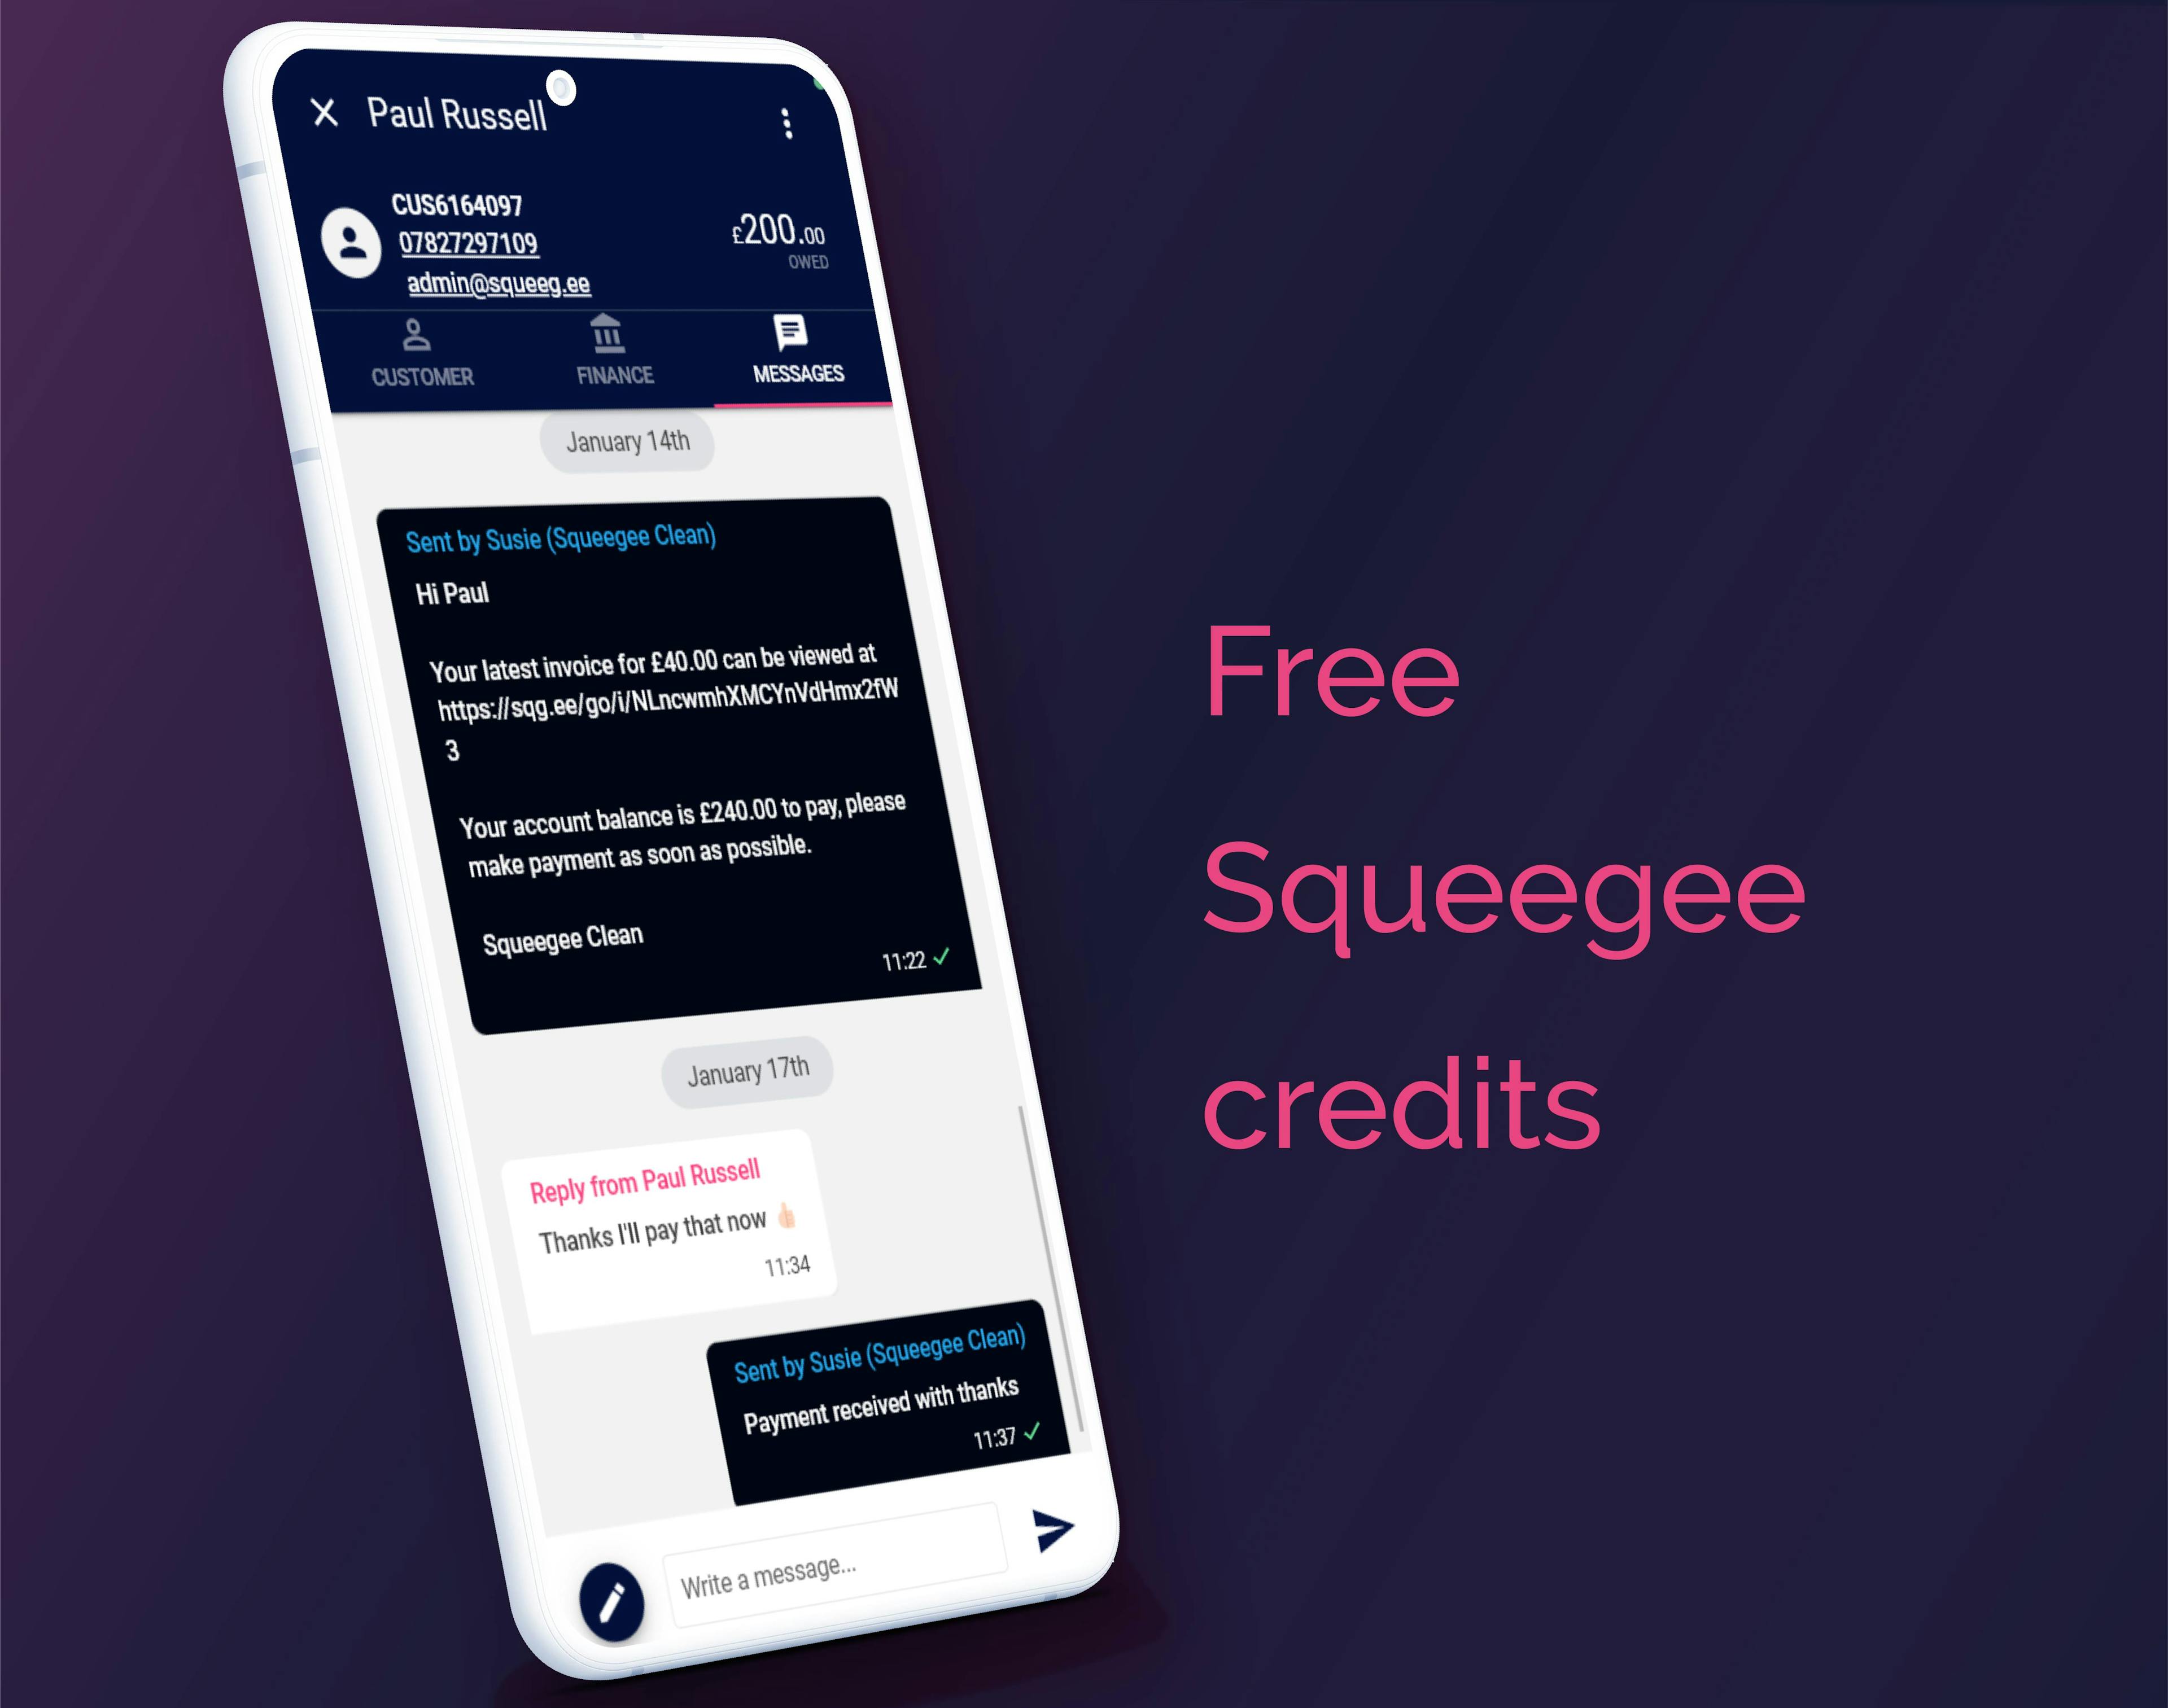 Free credits for all new users trialling Squeegee to help get them set up with 2-way SMS. 